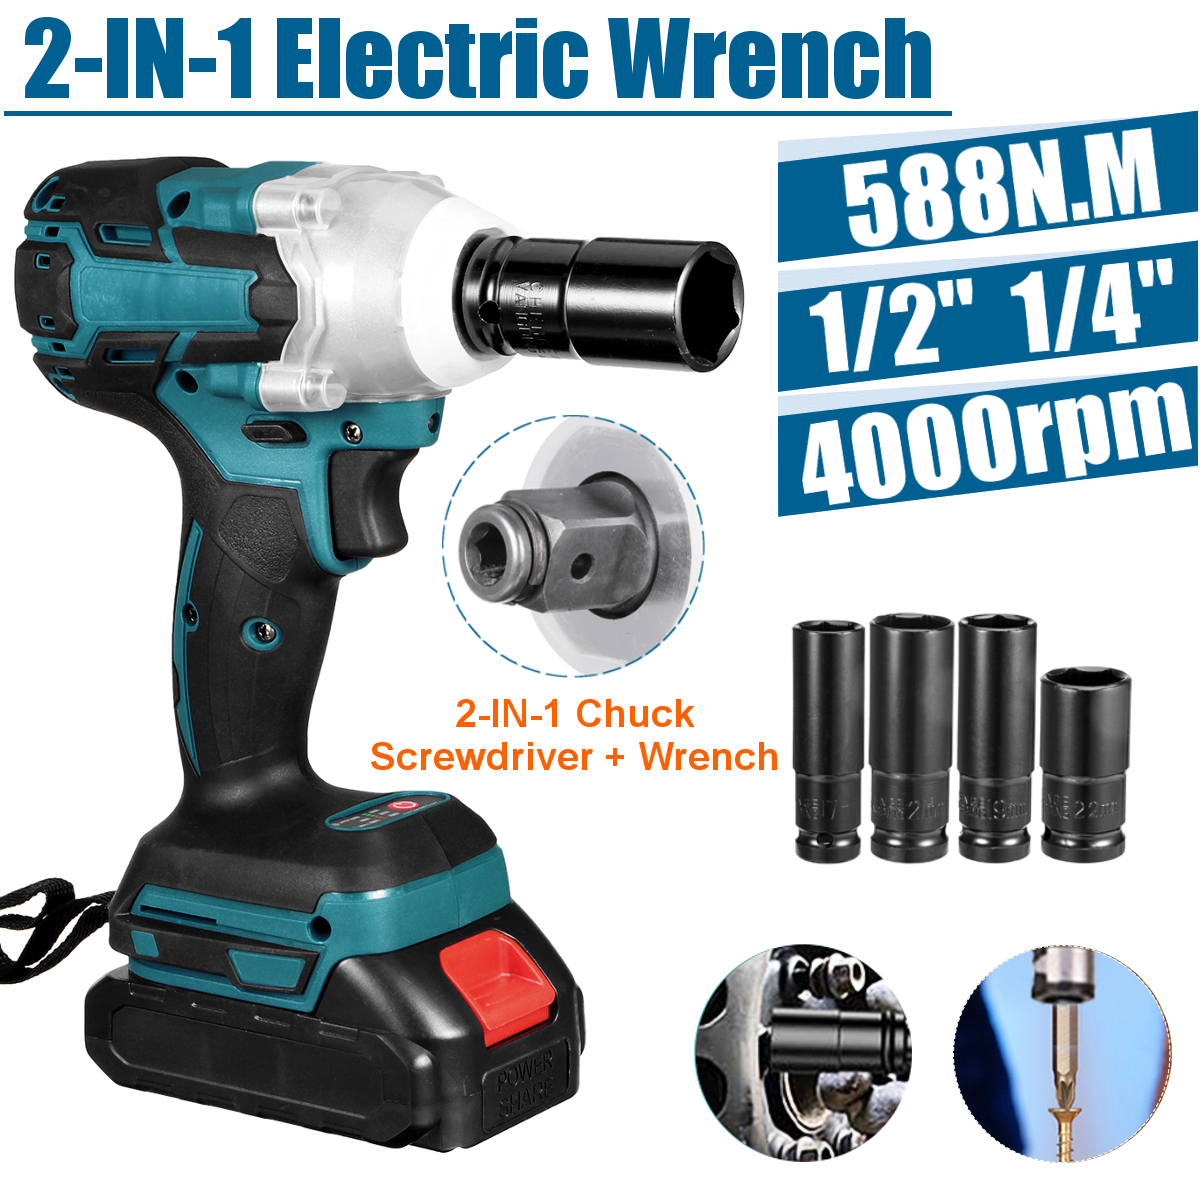 2-in-1-188VF-588Nm-Li-Ion-Brushless-Cordless-Electric-12quot-Wrench-14quotScrewdriver-Drill-W-12-Bat-1858198-3